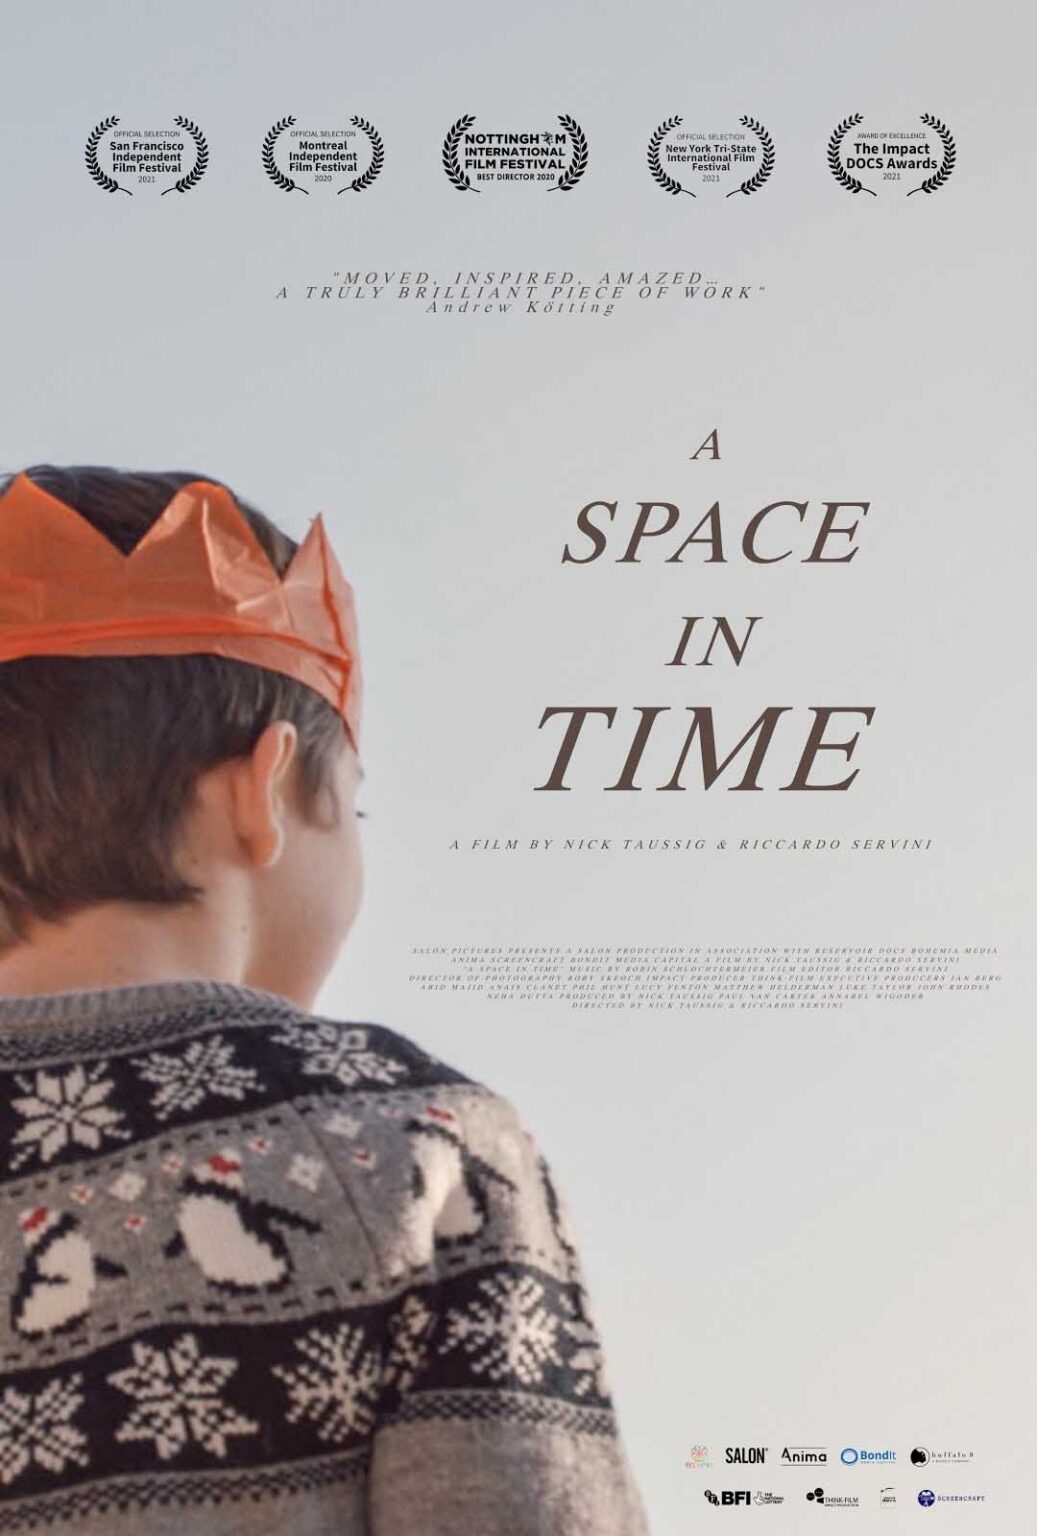 From director/producer Nick Taussig comes a powerful doc about a family brought together through hardship. Here's your exclusive look at 'A Space in Time'.